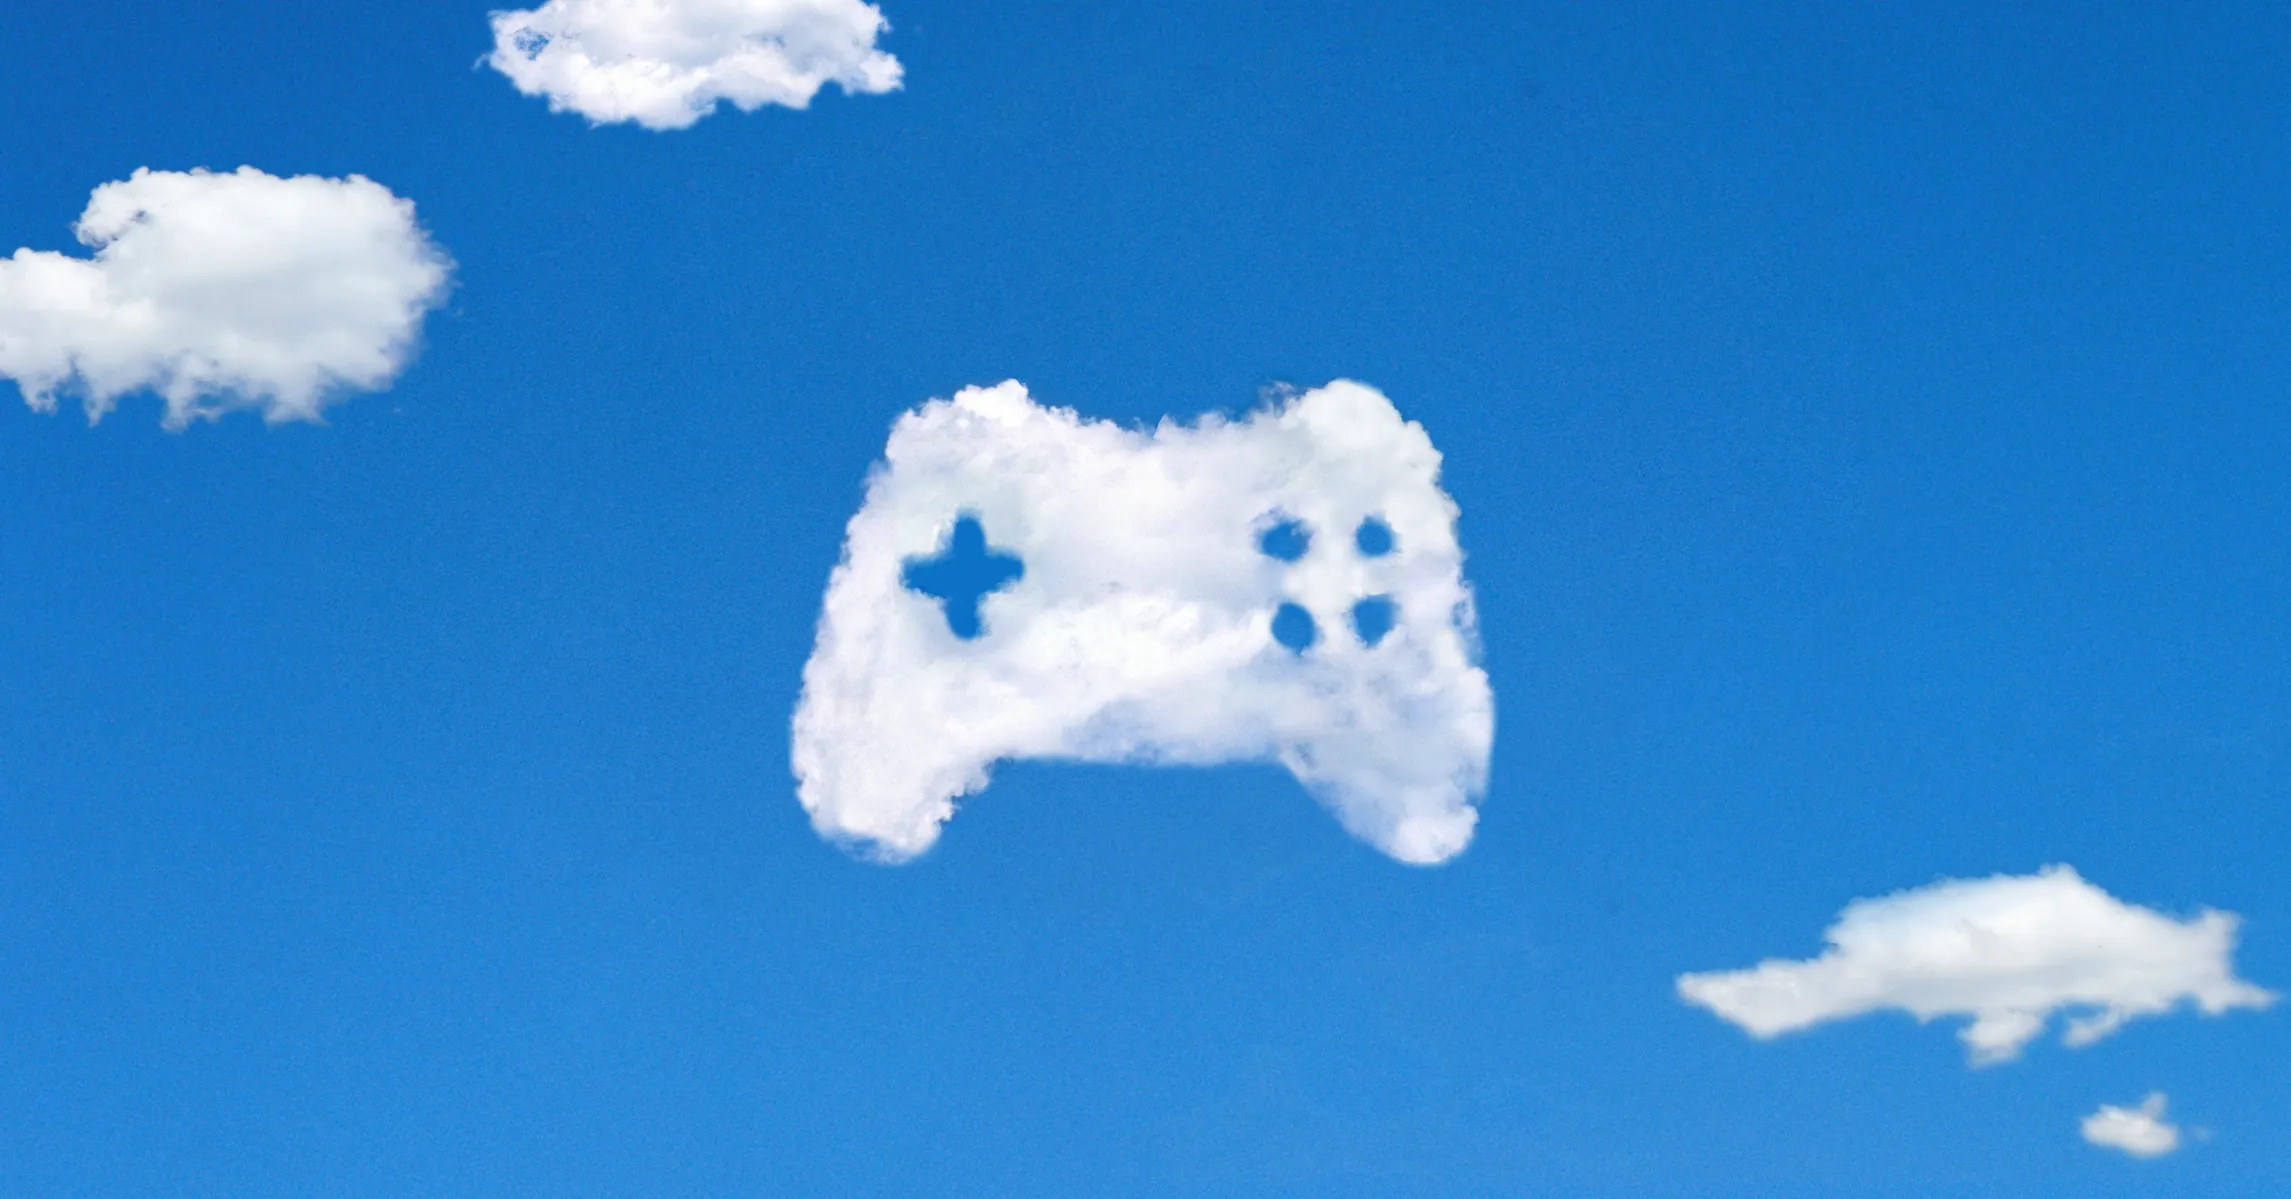 https://nftgames.net/wp-content/uploads/2023/02/CMA-report-says-some-cloud-gaming-providers-are-yet-to-enter-the-market.webp